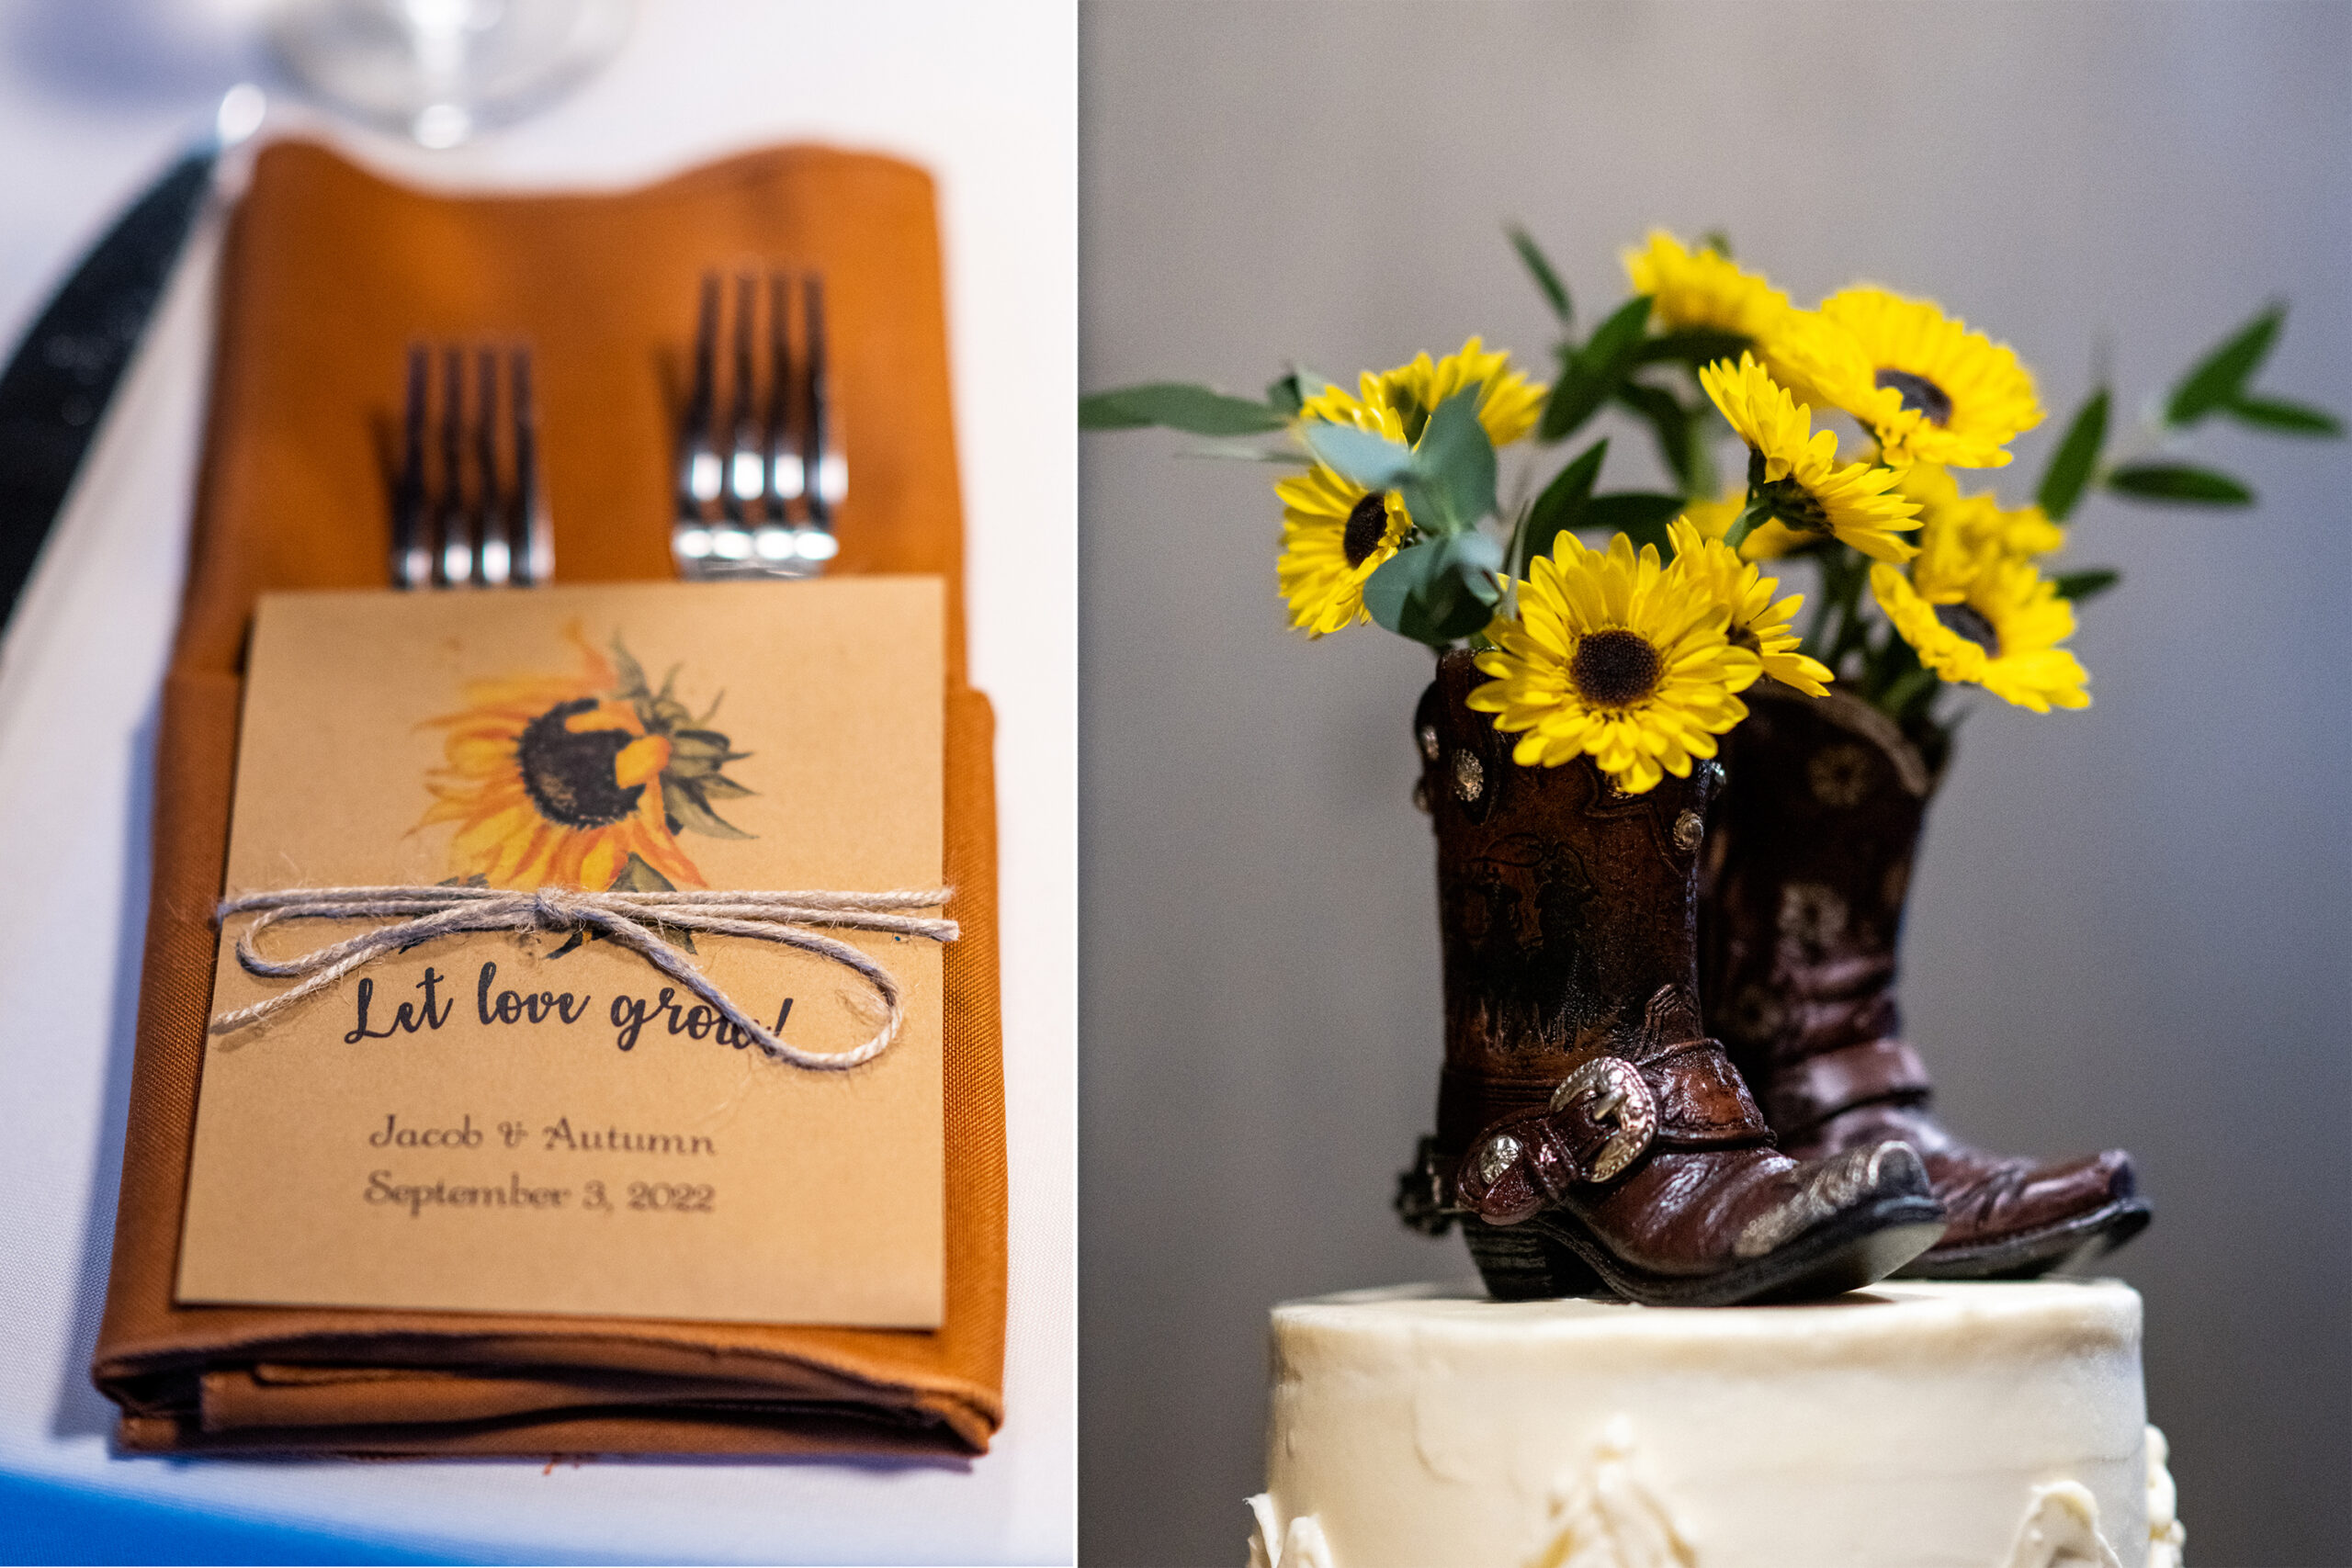 At left, a setup with forms, stationary, napkin saying "Let Love Grow" next to another picture of boots on a wedding cake with sunflowers at the Rose Event Center in Golden, Colorado, for a wedding.